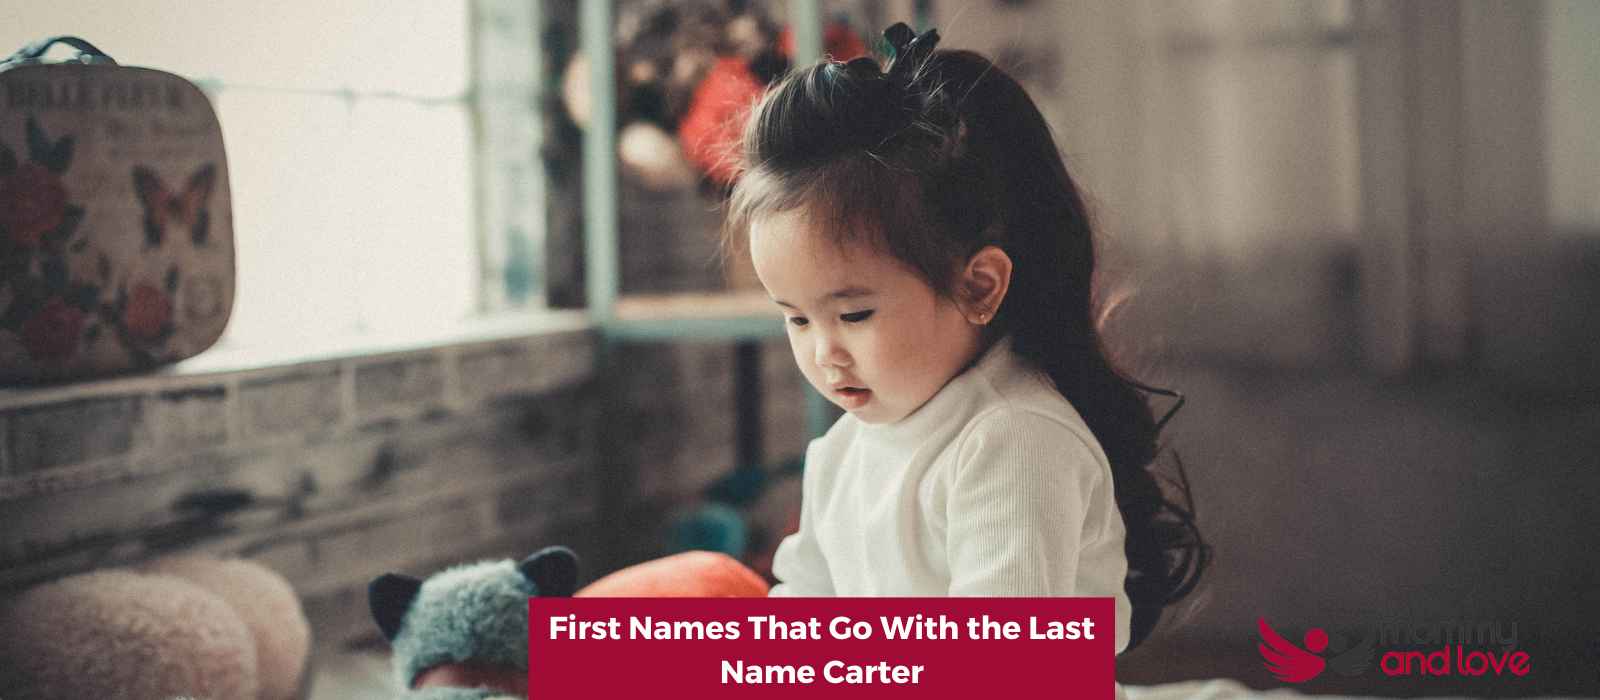 101 First Names That Go With the Last Name Carter